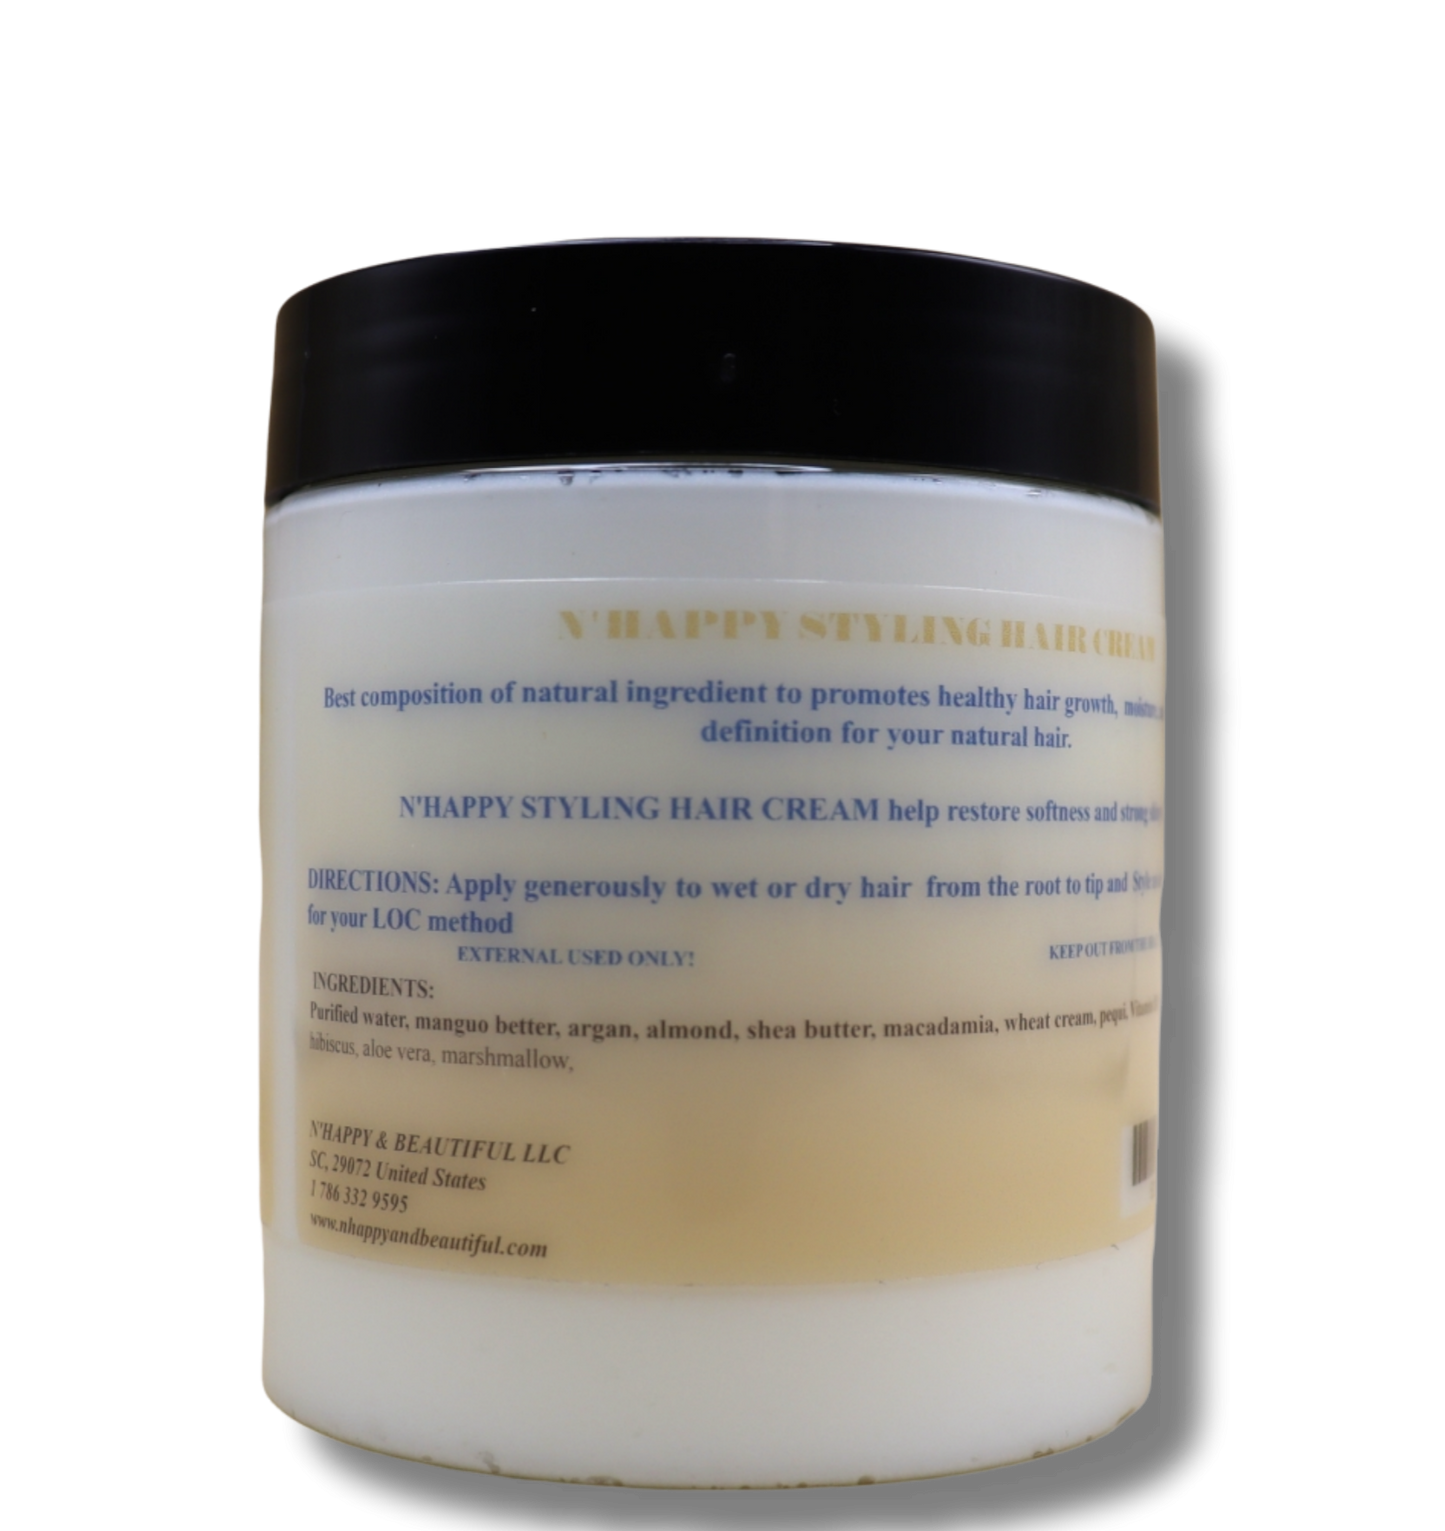 Styling Hair cream / Wholesale / Private Label 8 oz container